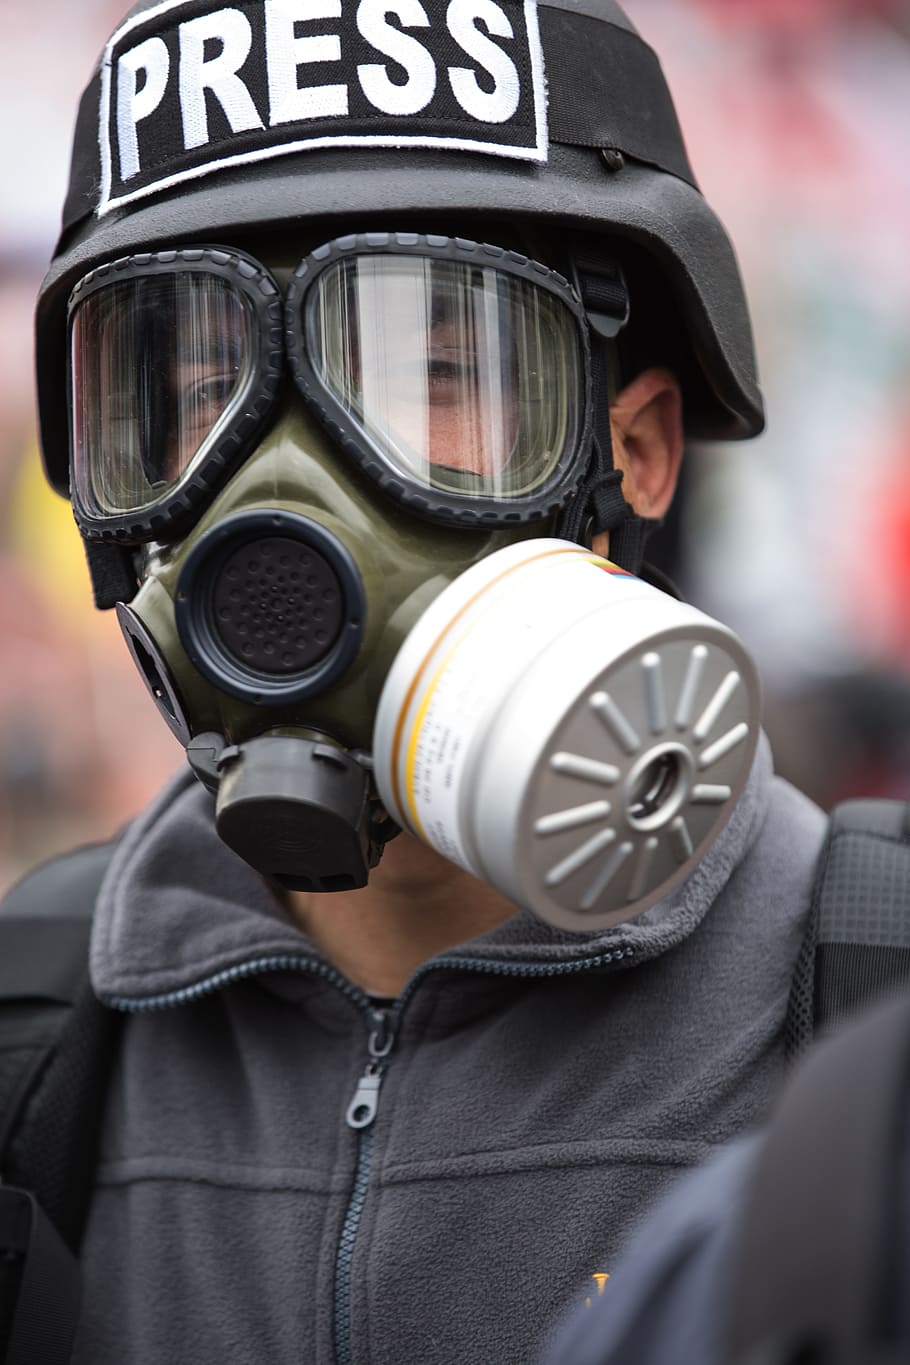 gas mask, portrait, exposure, attack, young, human, violence, adult, reporter, people